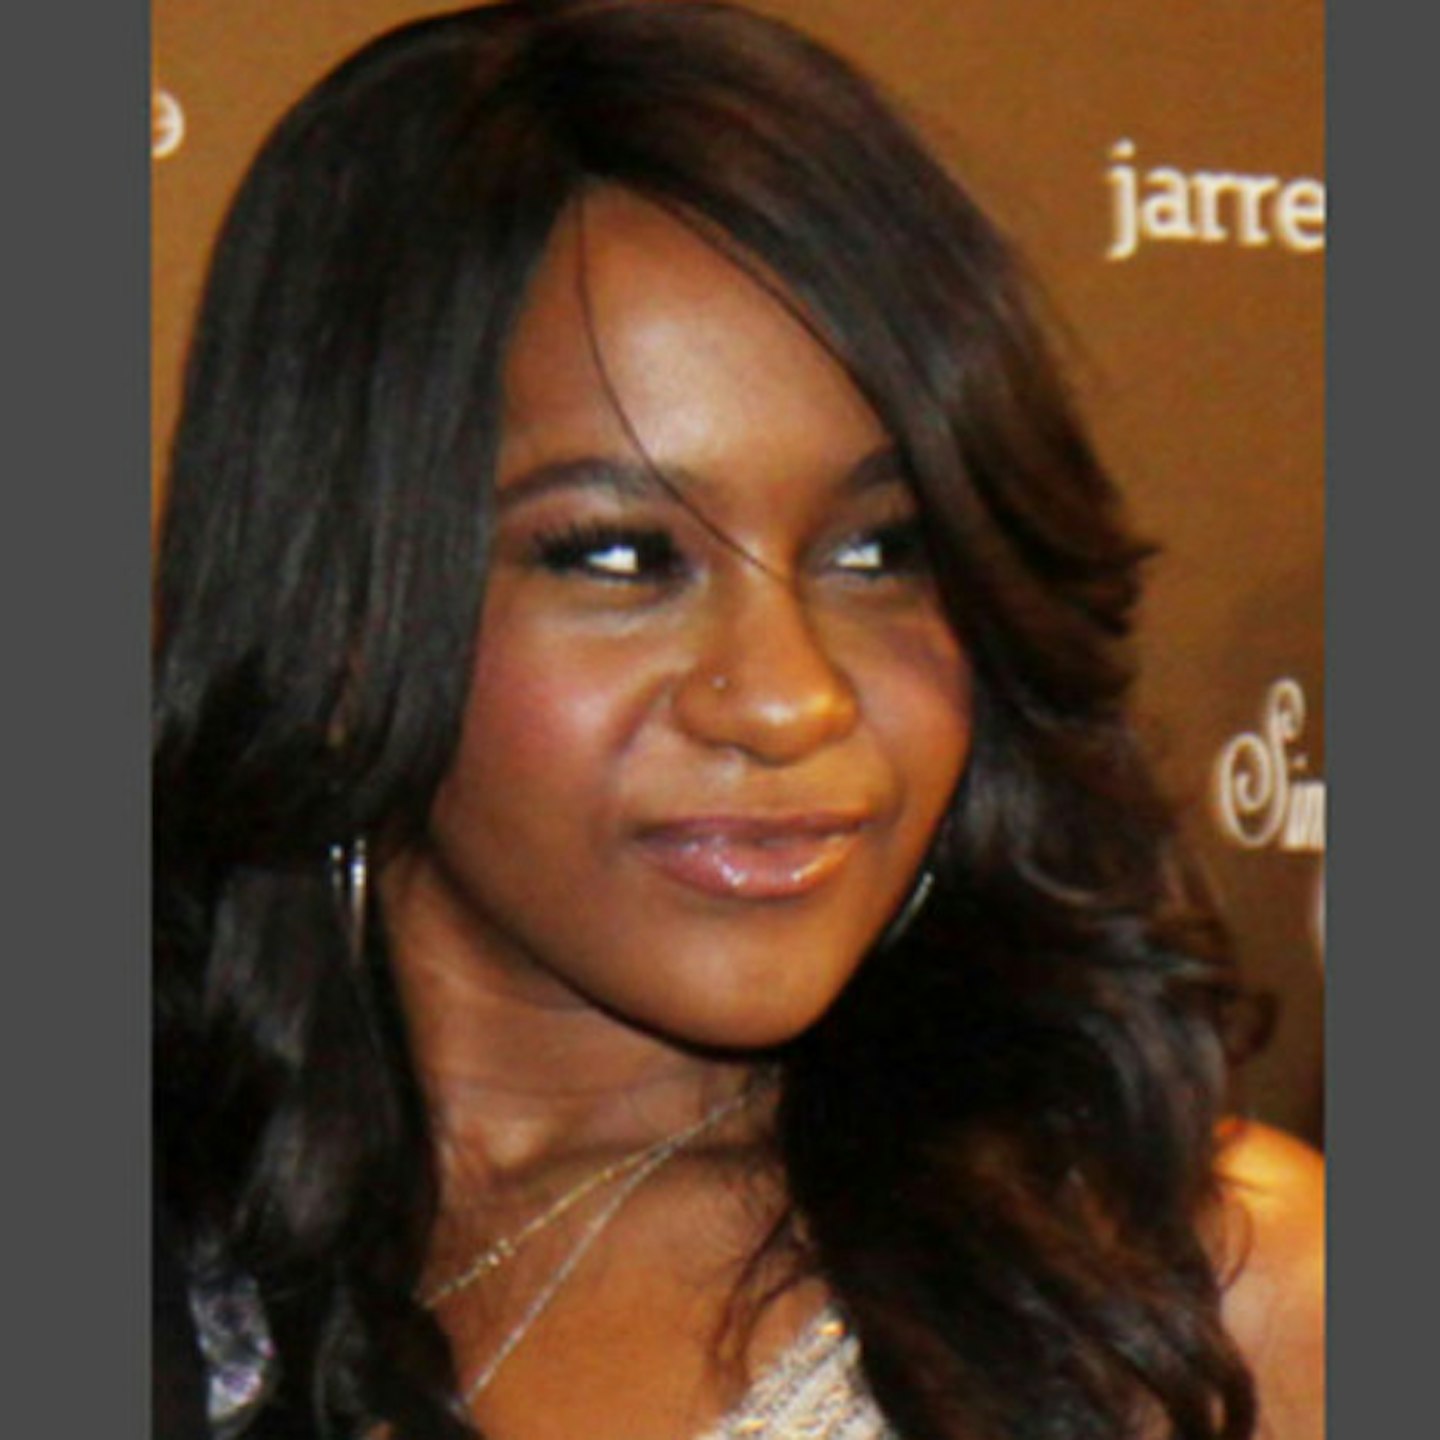 Bobbi Kristina is still unresponsive after being found unconscious in January